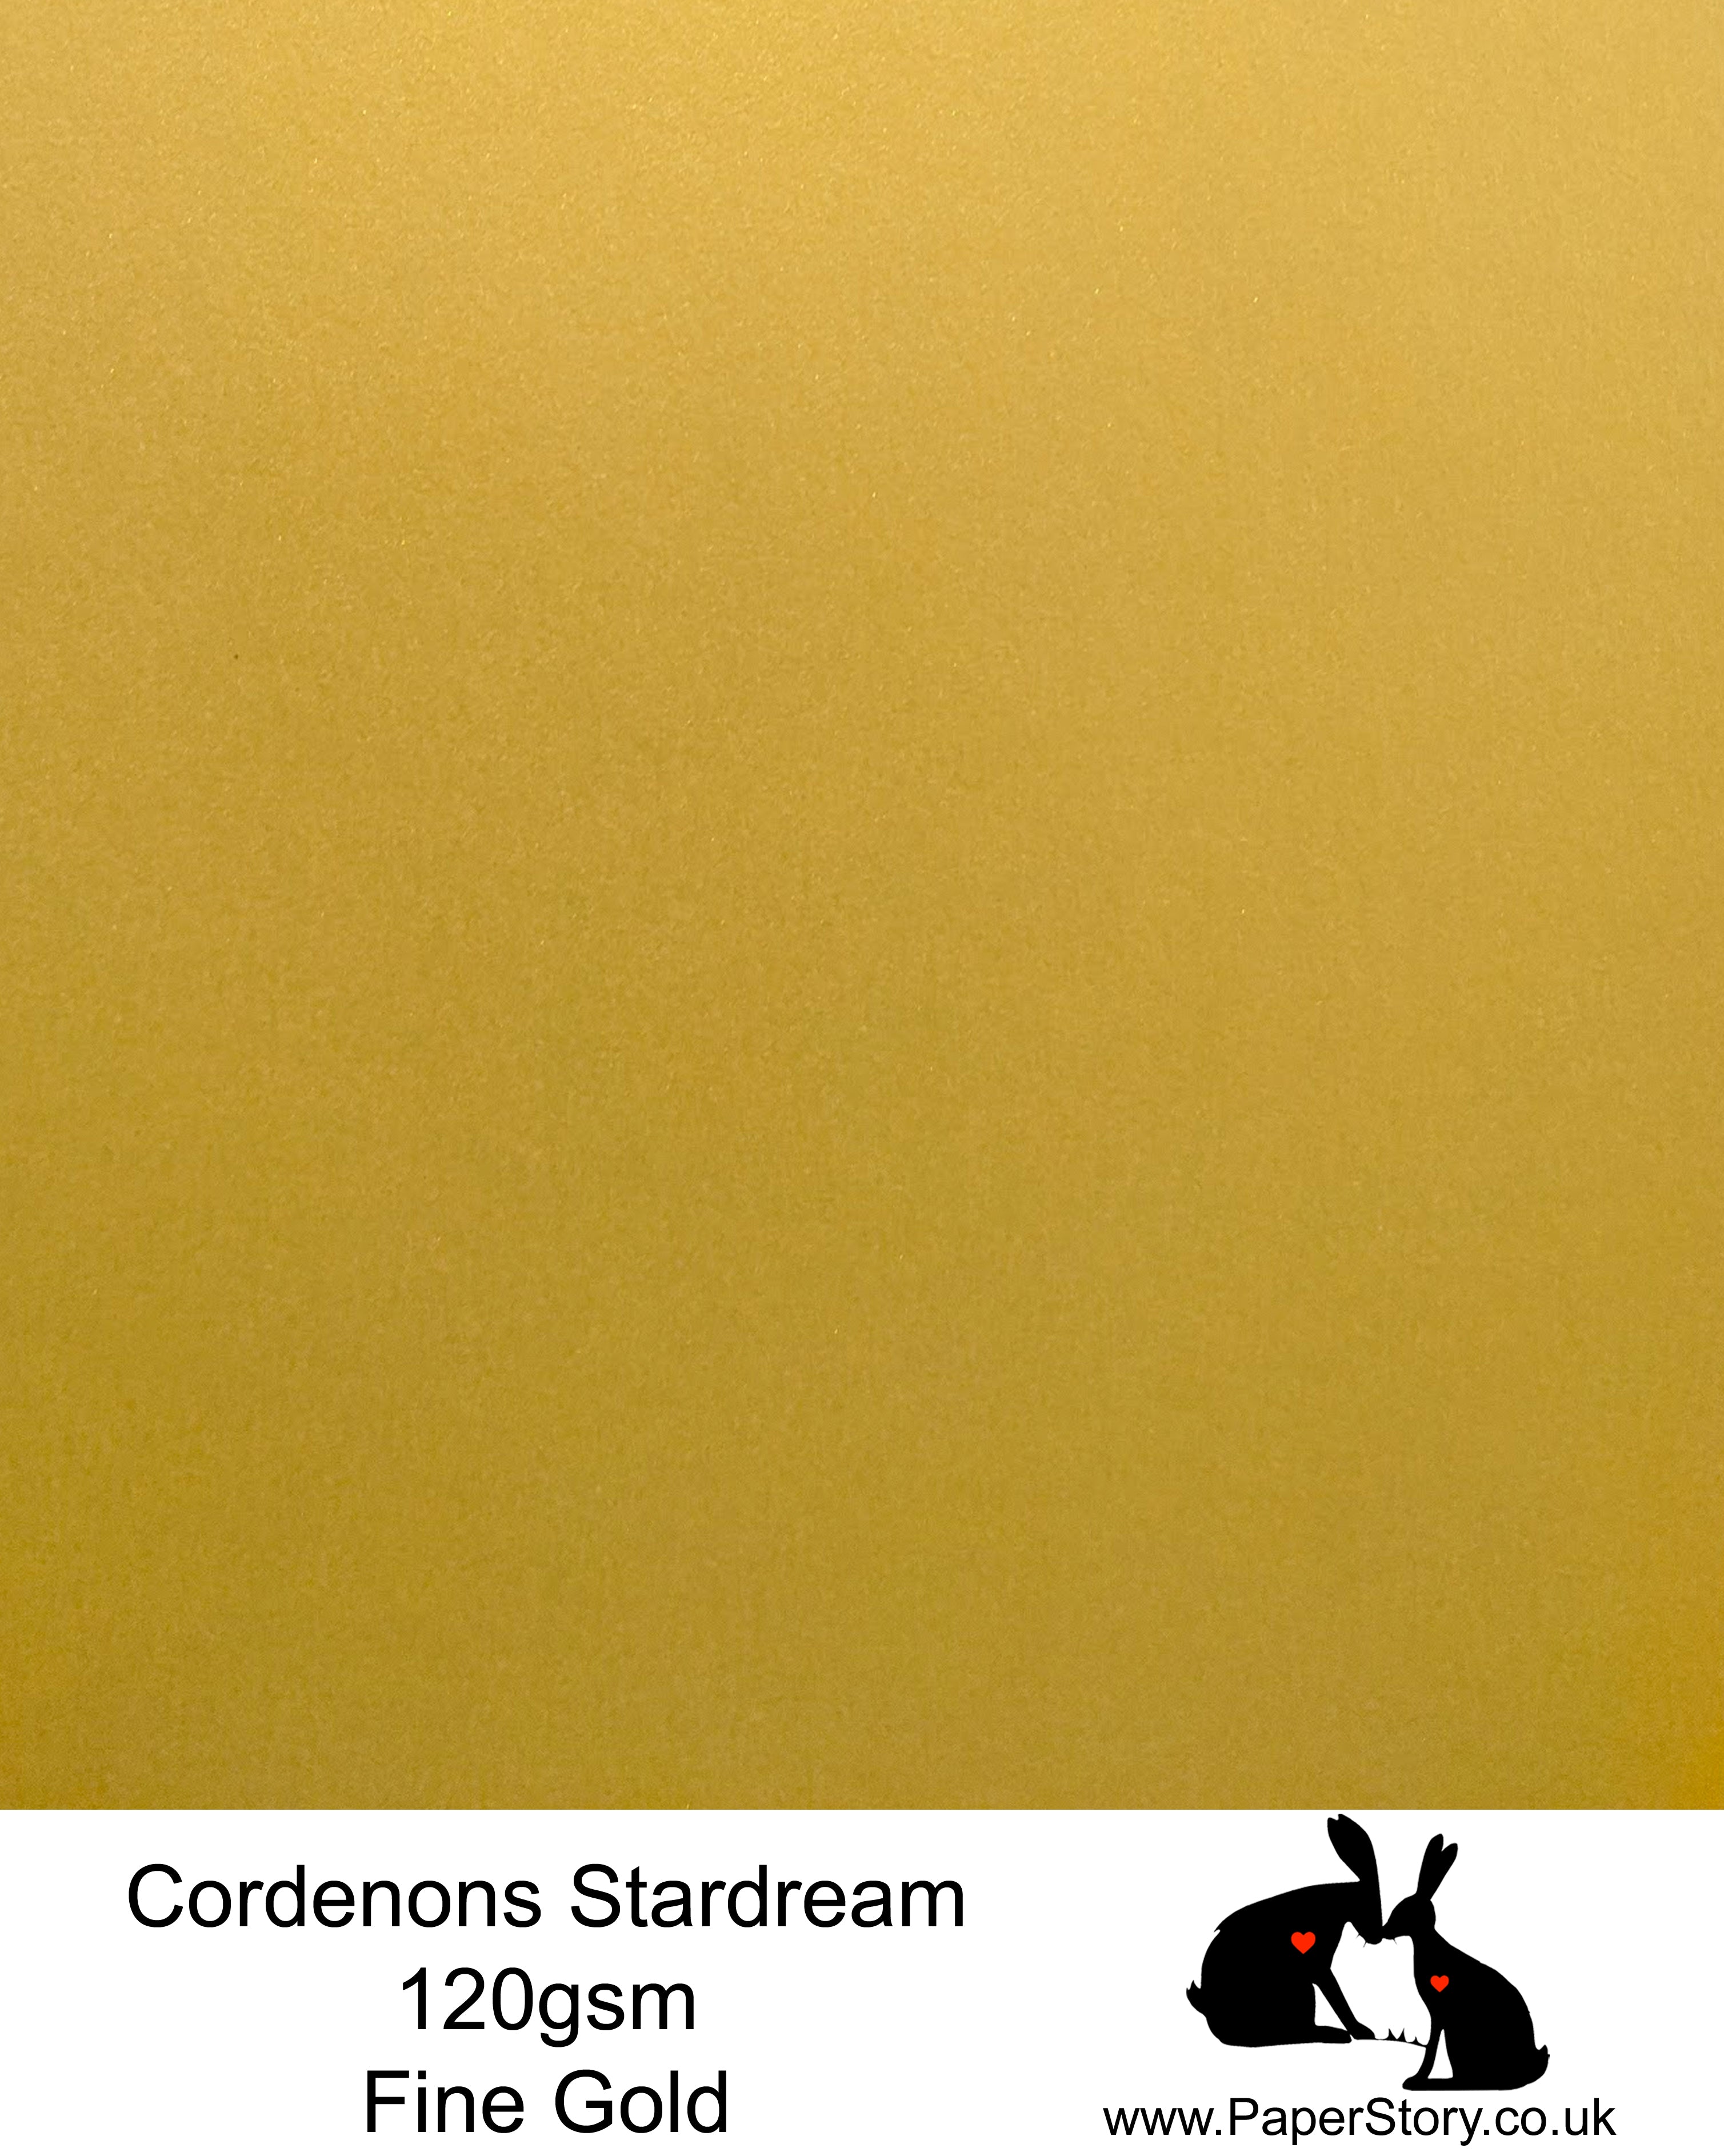 fine gold A4 Stardream 120gsm paper for Papercutting, craft, flower making  and wedding stationery. Stardream is a luxury Italian paper from Italy, it is a double sided quality Pearlescent paper with a matching colour core. FSC Certified, acid free, archival and PH Neutral